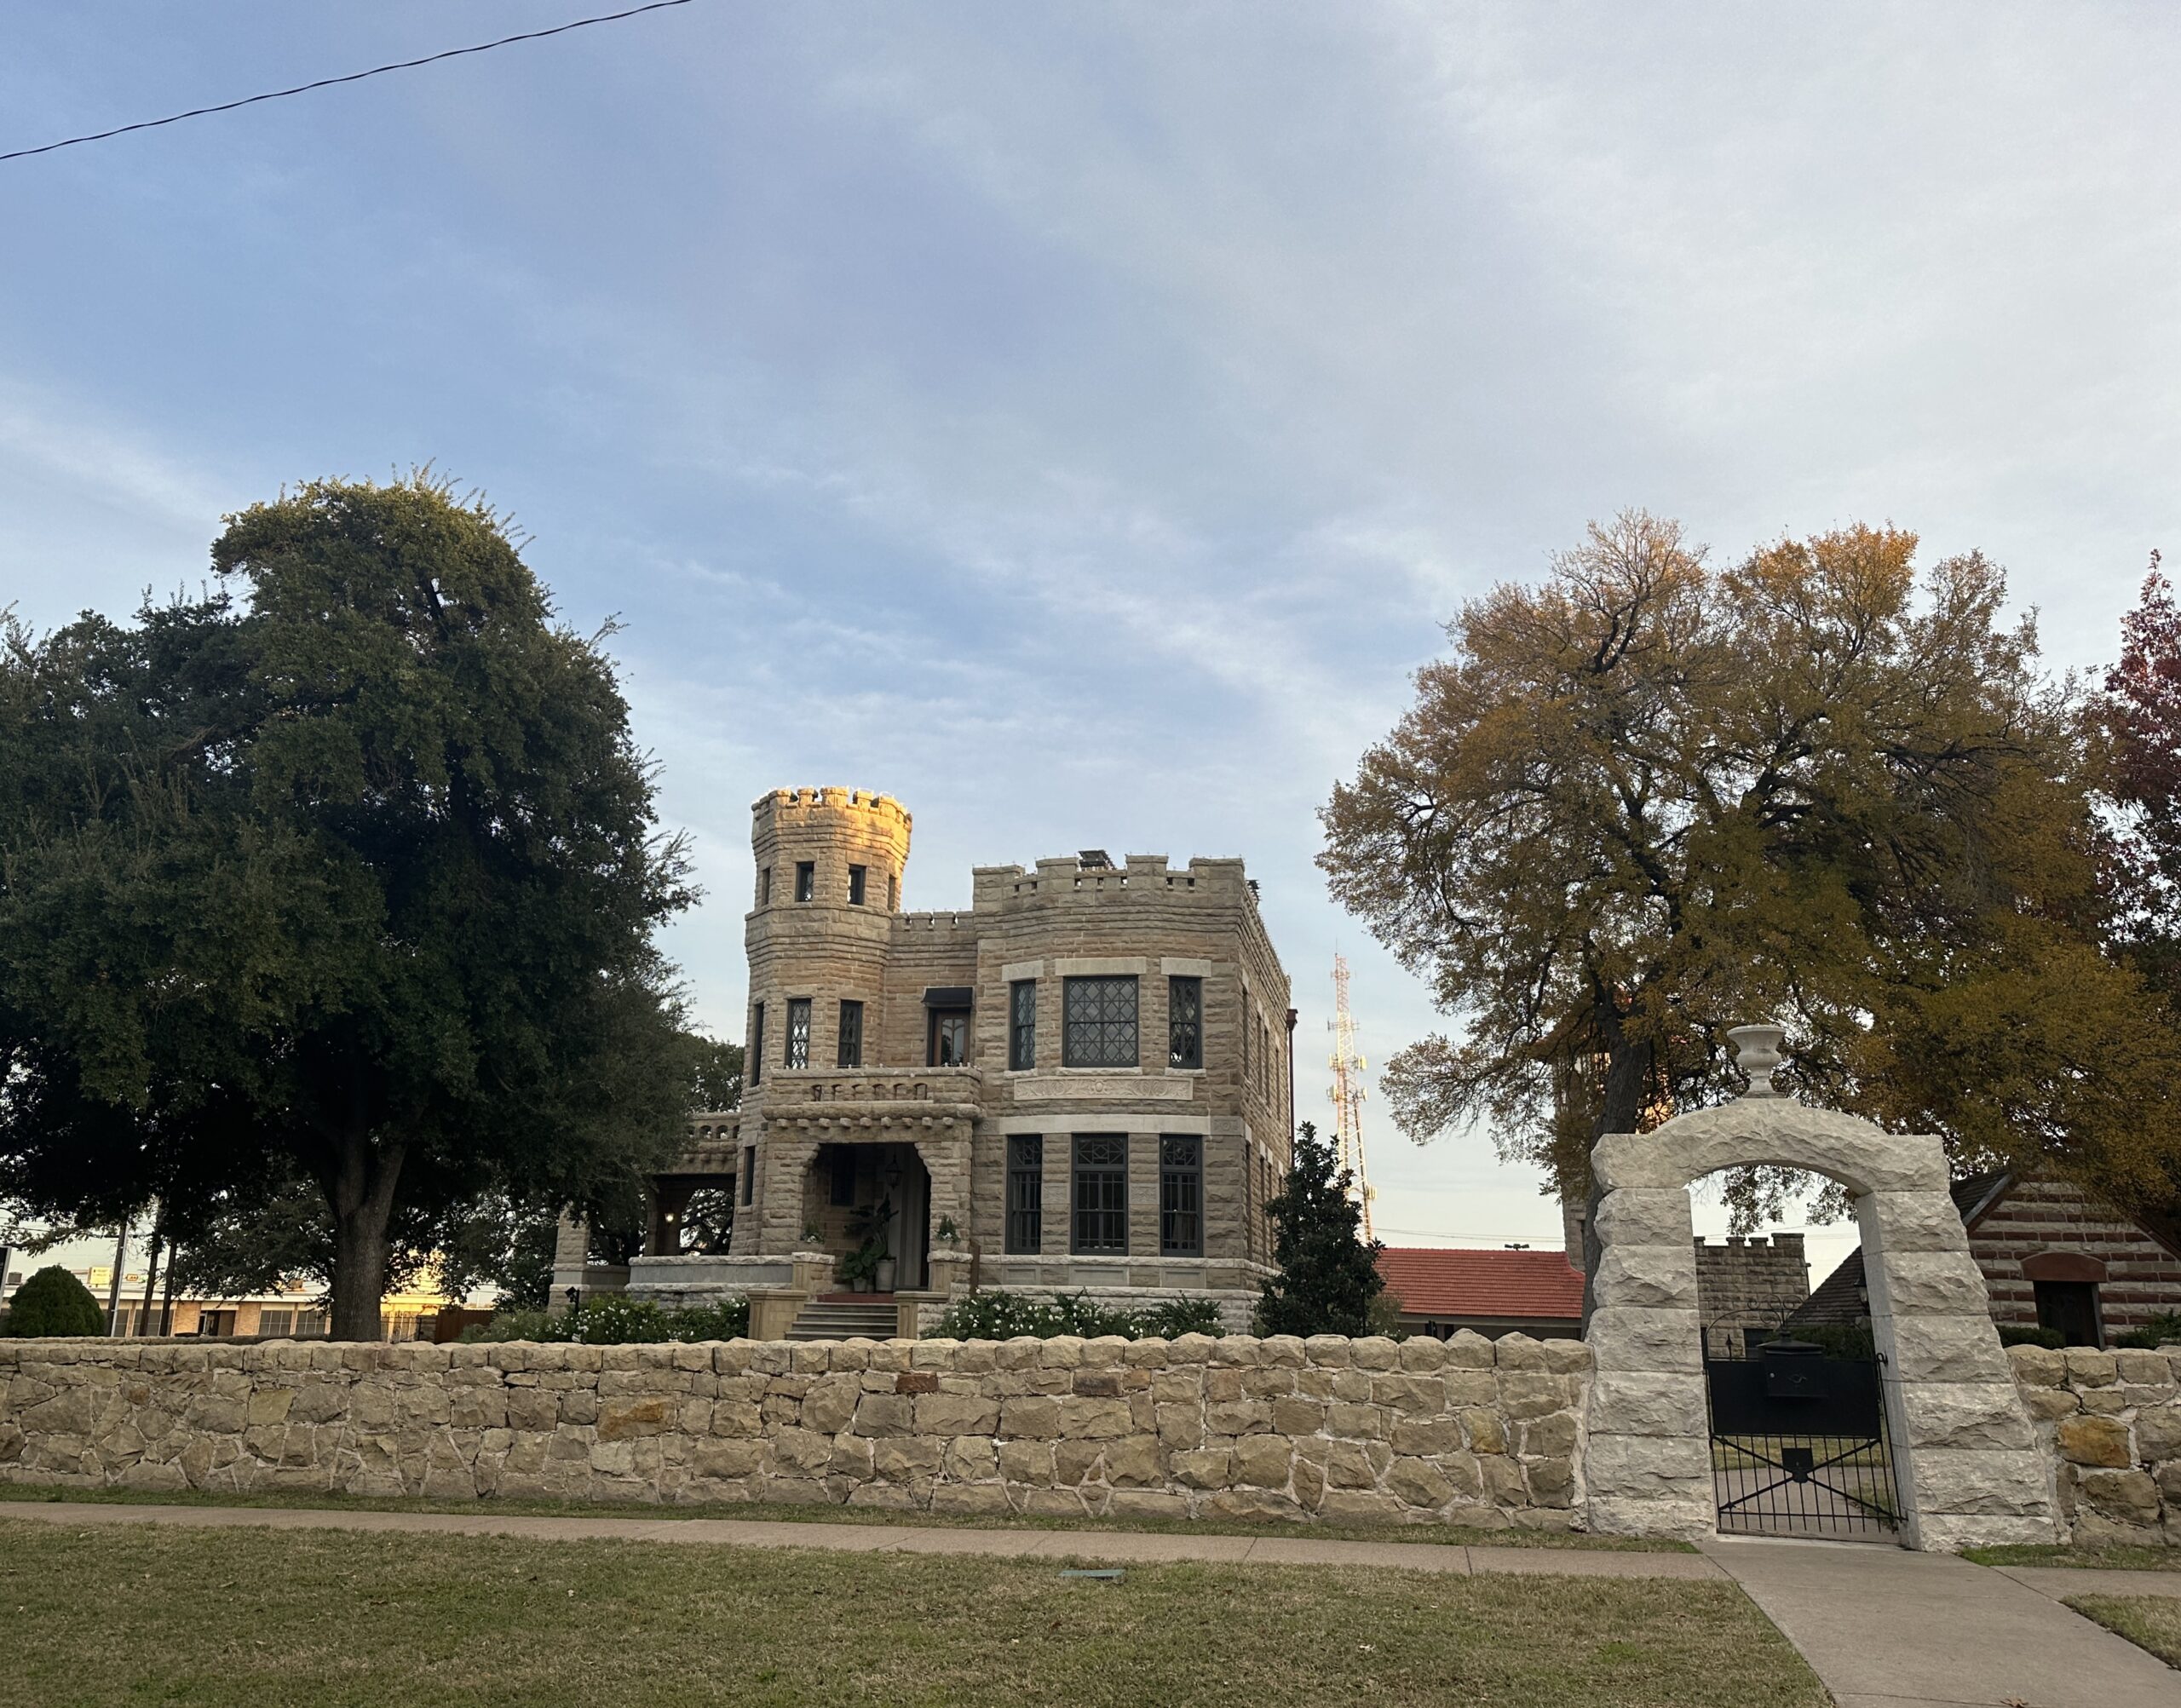 A castle that is made of white stone with a gate surrounding the complex. It's in Waco, Texas. The sky is blue with few clouds. The grass is tinted yellow, but the trees are green.